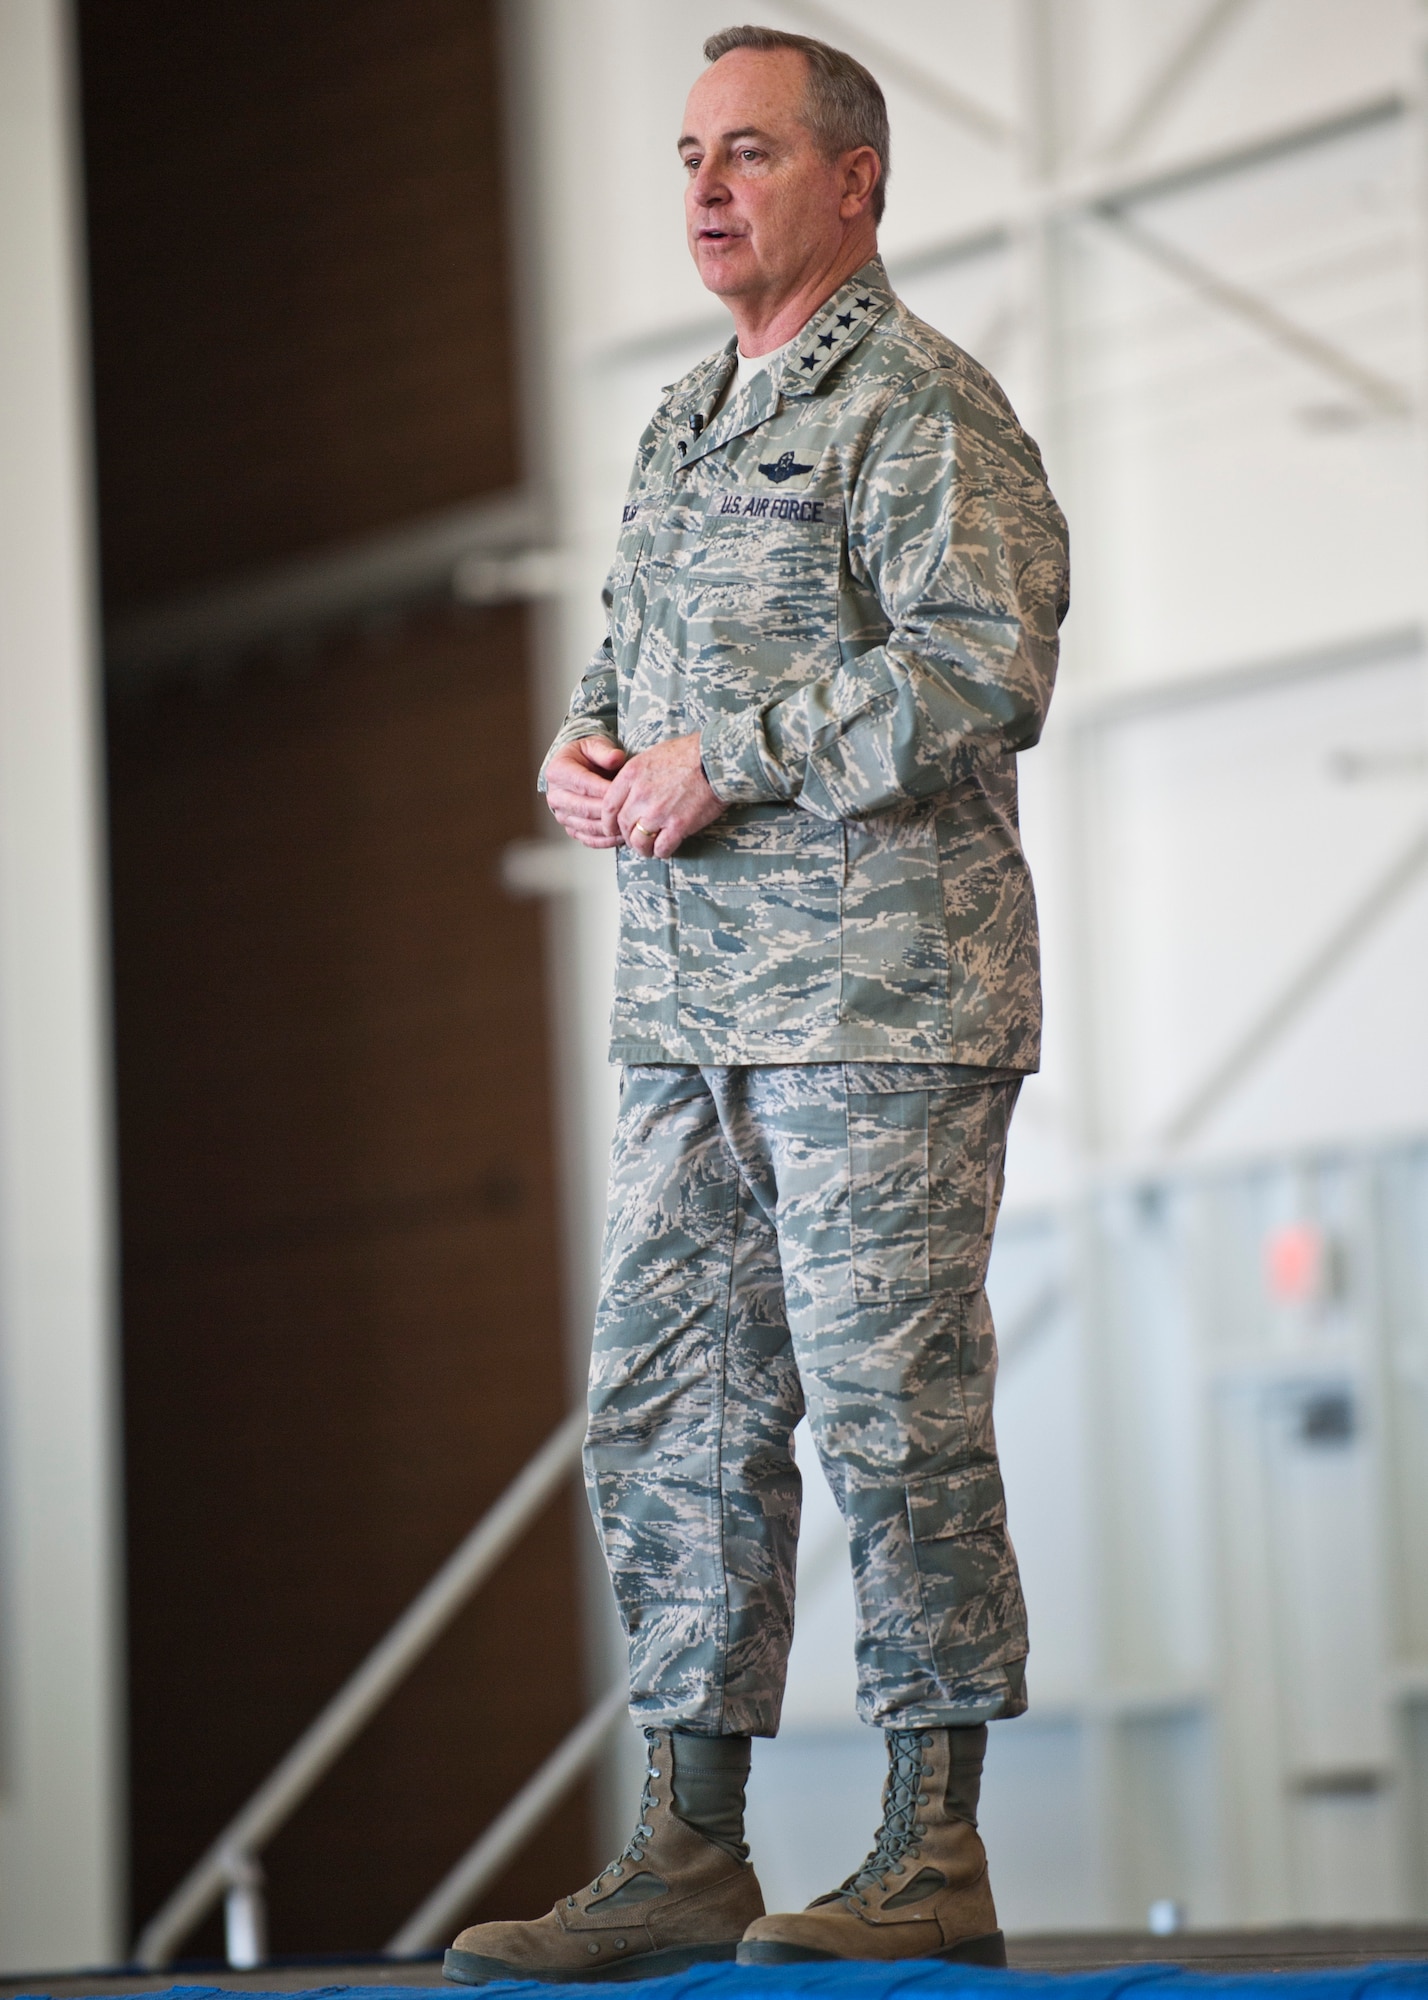 Air Force Chief of Staff Gen. Mark A. Welsh III, speaks to Airmen during a town-hall style meeting, April 7, 2014 at Nellis Air Force Base, Nev. Welsh, along with Chief Master Sgt. of the Air Force James A. Cody and their spouses, Betty and Athena, visited Nellis to thank Airmen and their families for their many contributions and sacrifices. (U.S. Air Force photo by Senior Airman Jason Couillard)